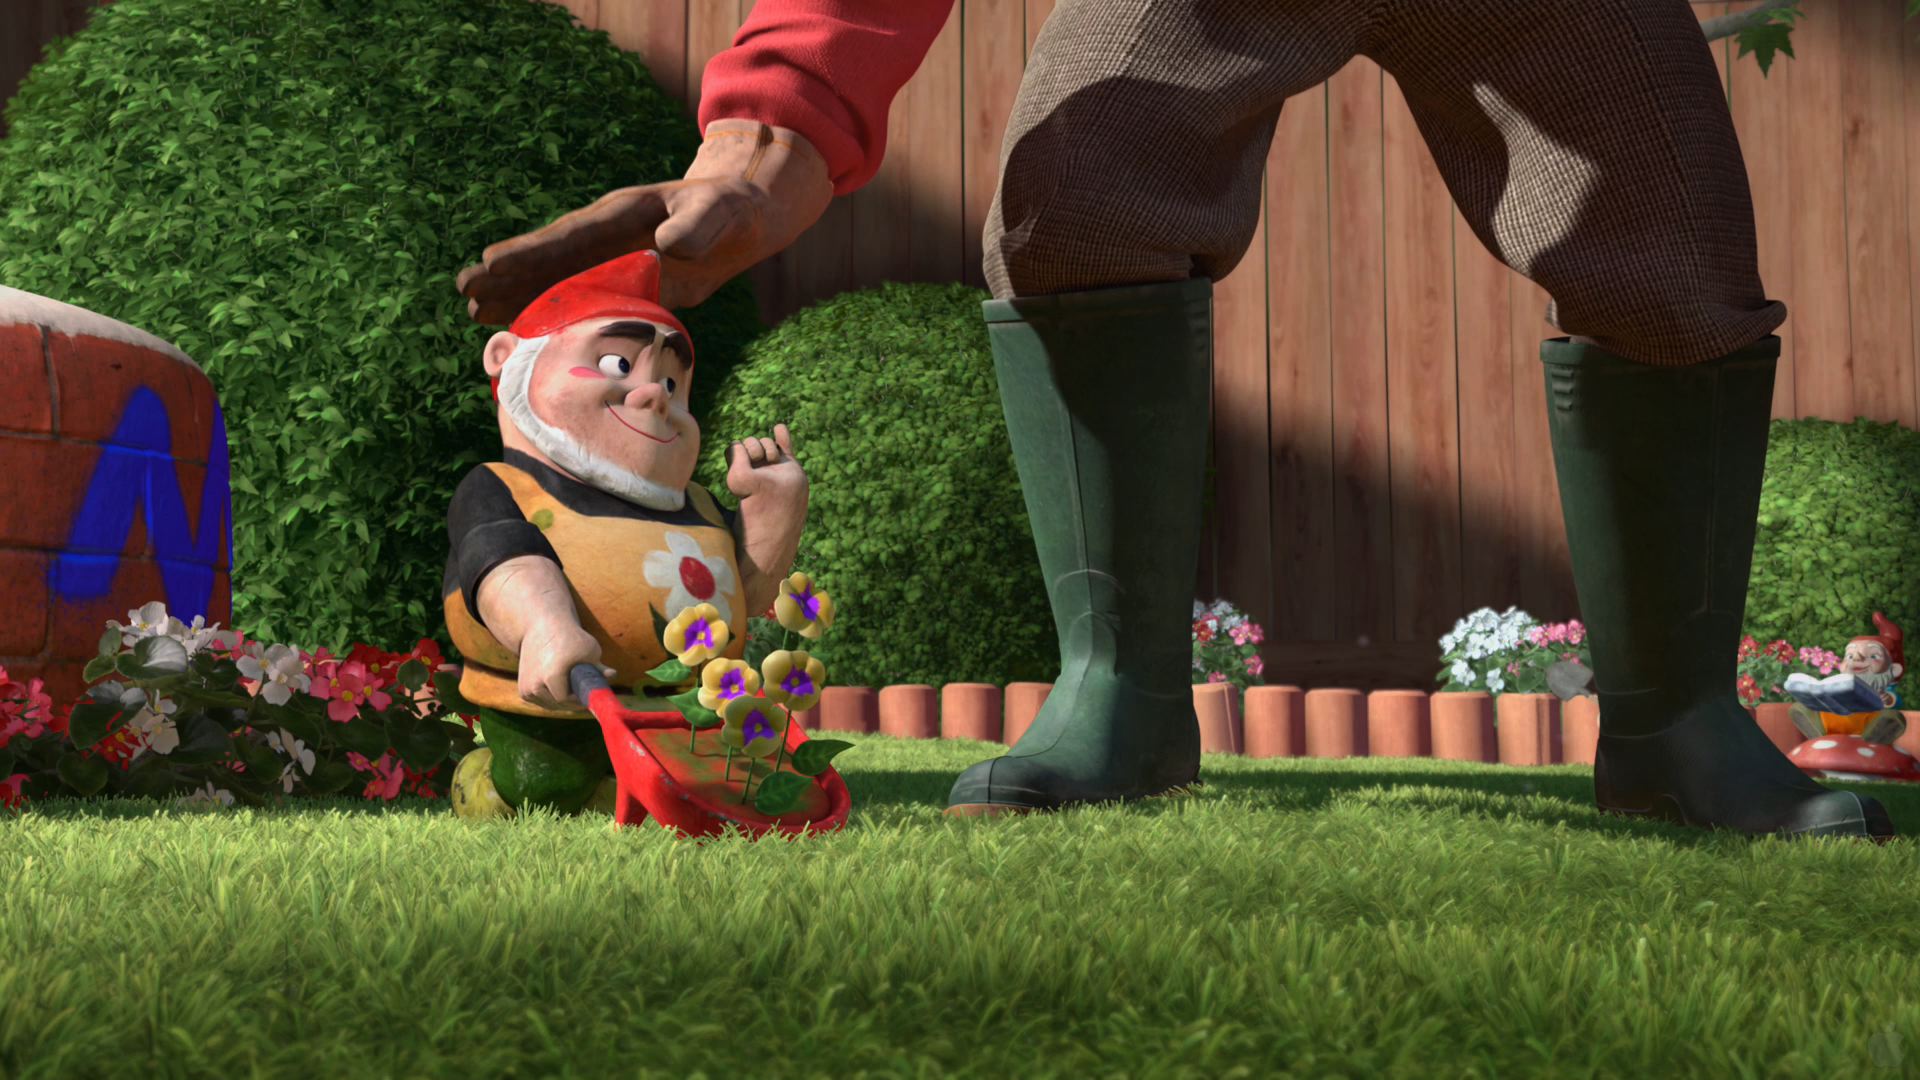 Free download Tybalt the Garden Gnome from Gnomeo and Juliet Desktop [1920x1080] for your Desktop, Mobile & Tablet. Explore Garden Gnome Wallpaper. Gnome Wallpaper, Gnome Wallpaper for